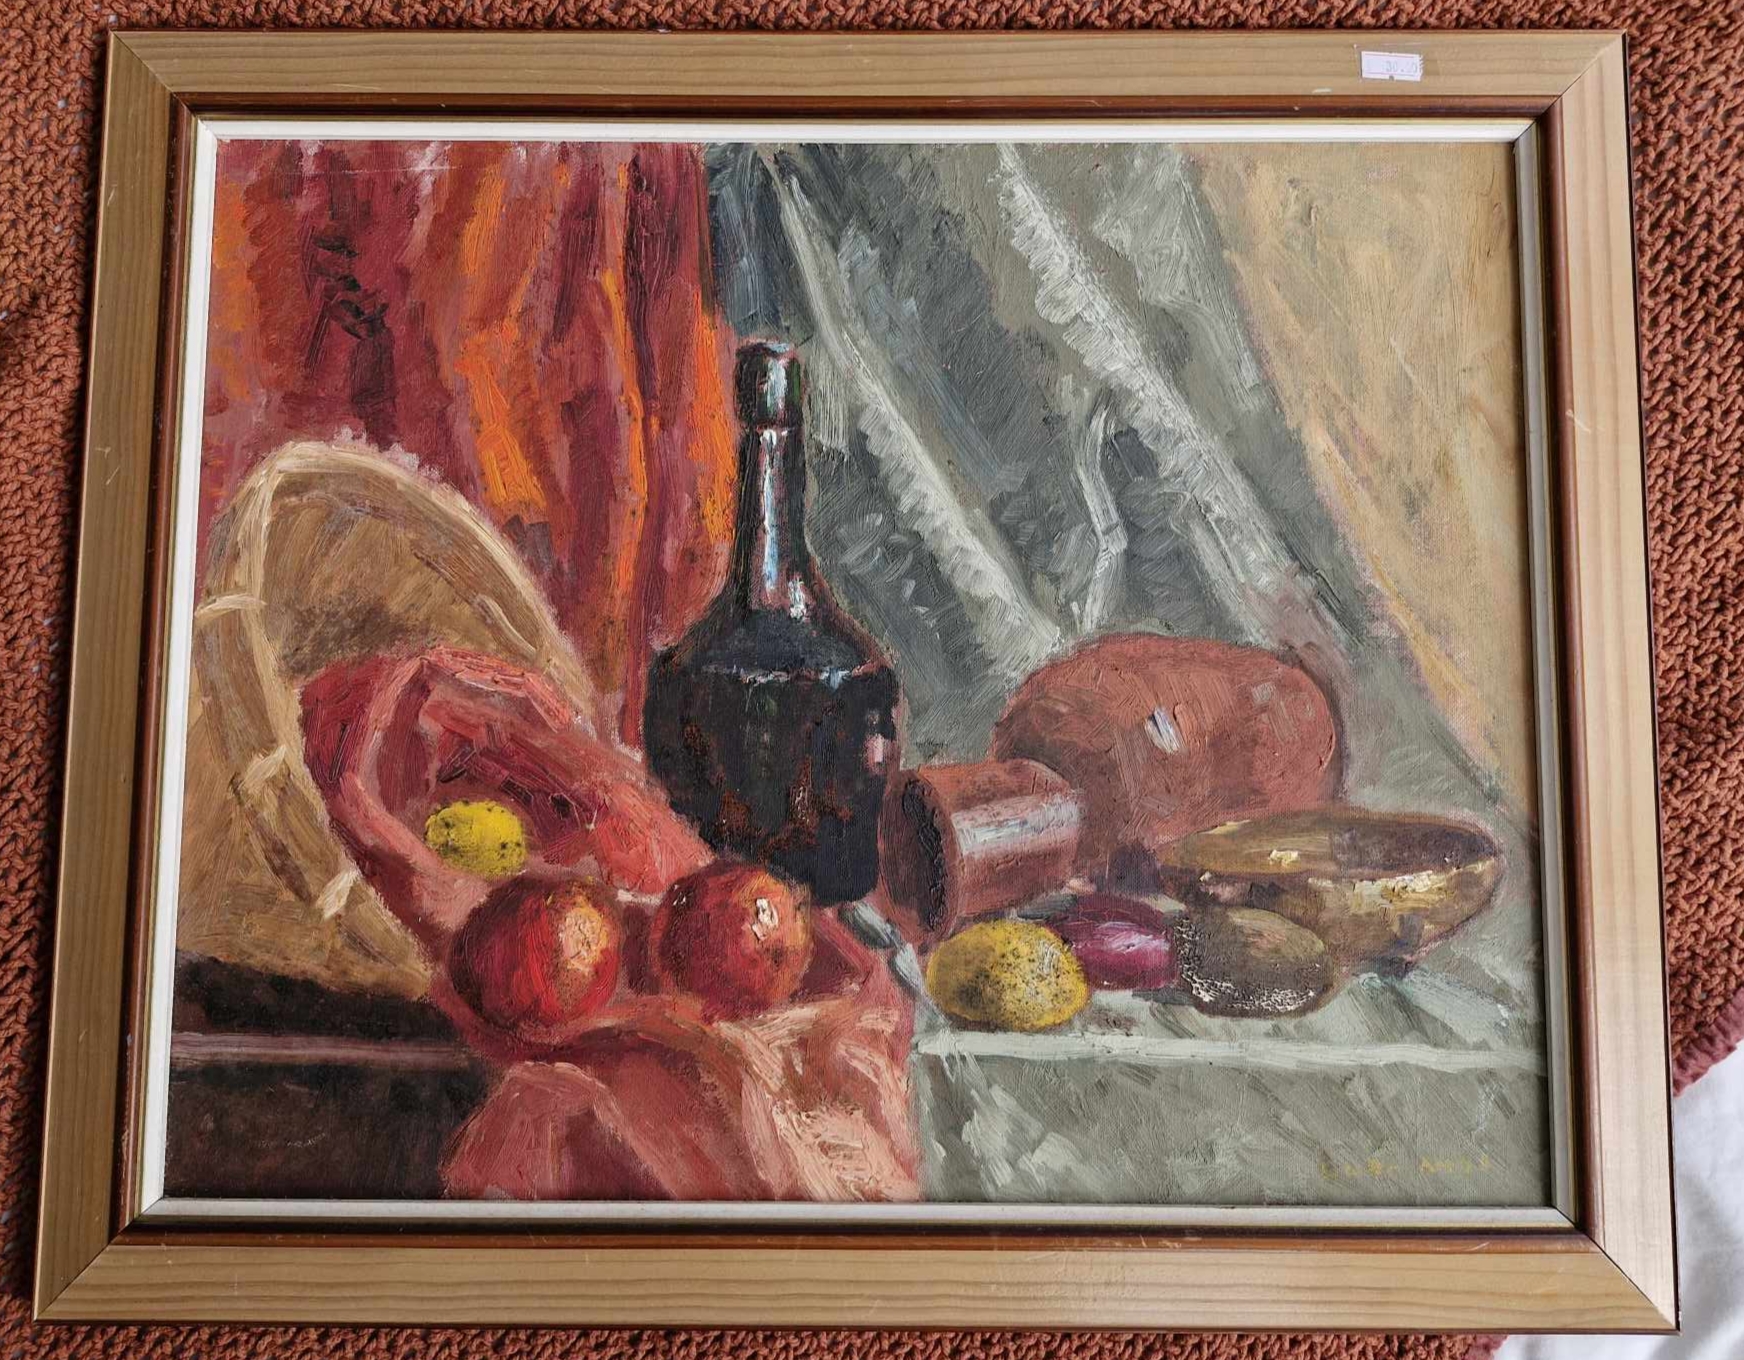 A photograph of a framed painting, depicting a still life of fruit and drinking vessels.